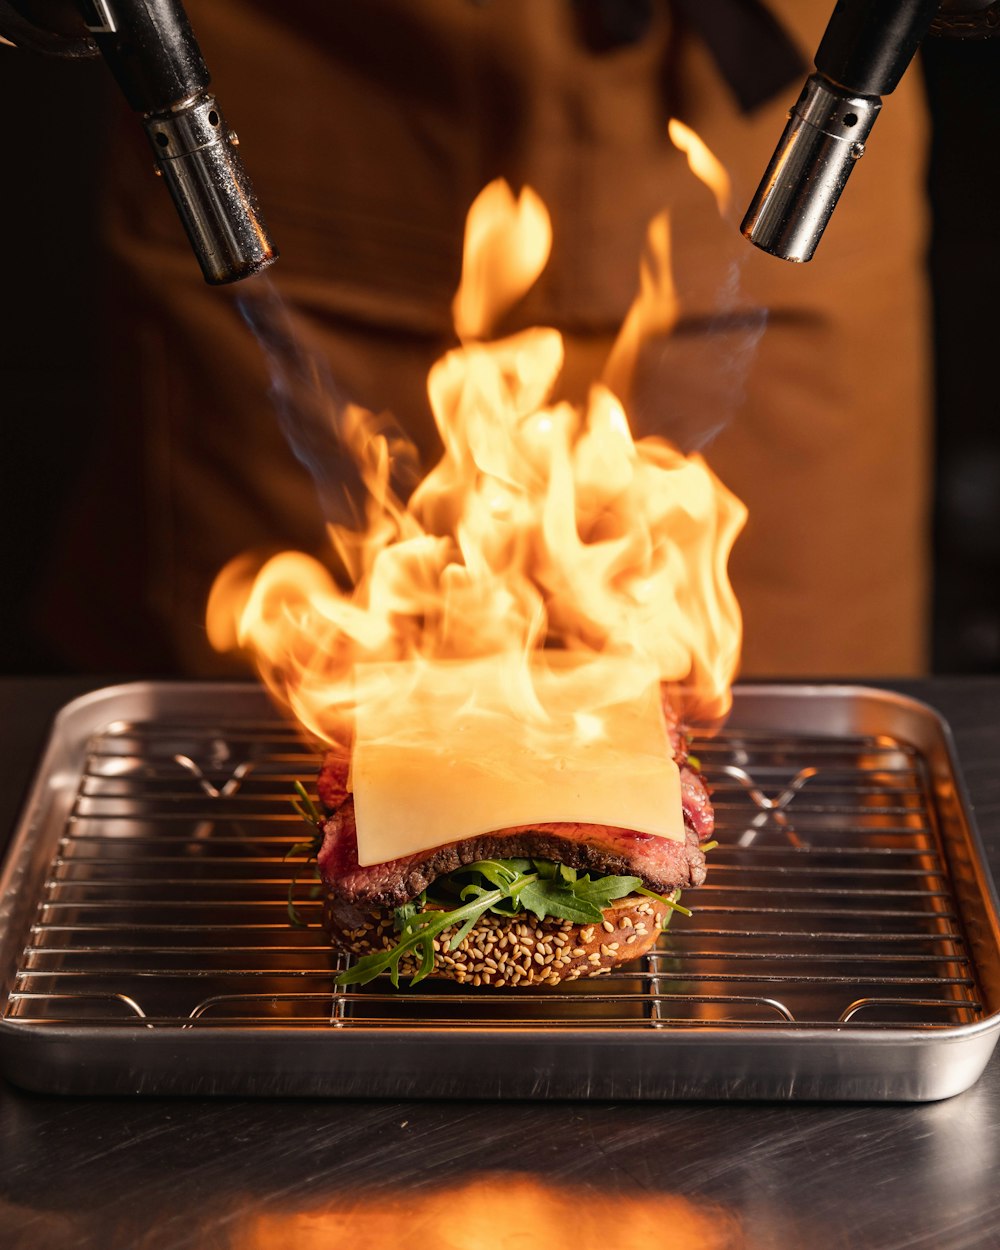 a sandwich on a grill with flames coming out of it